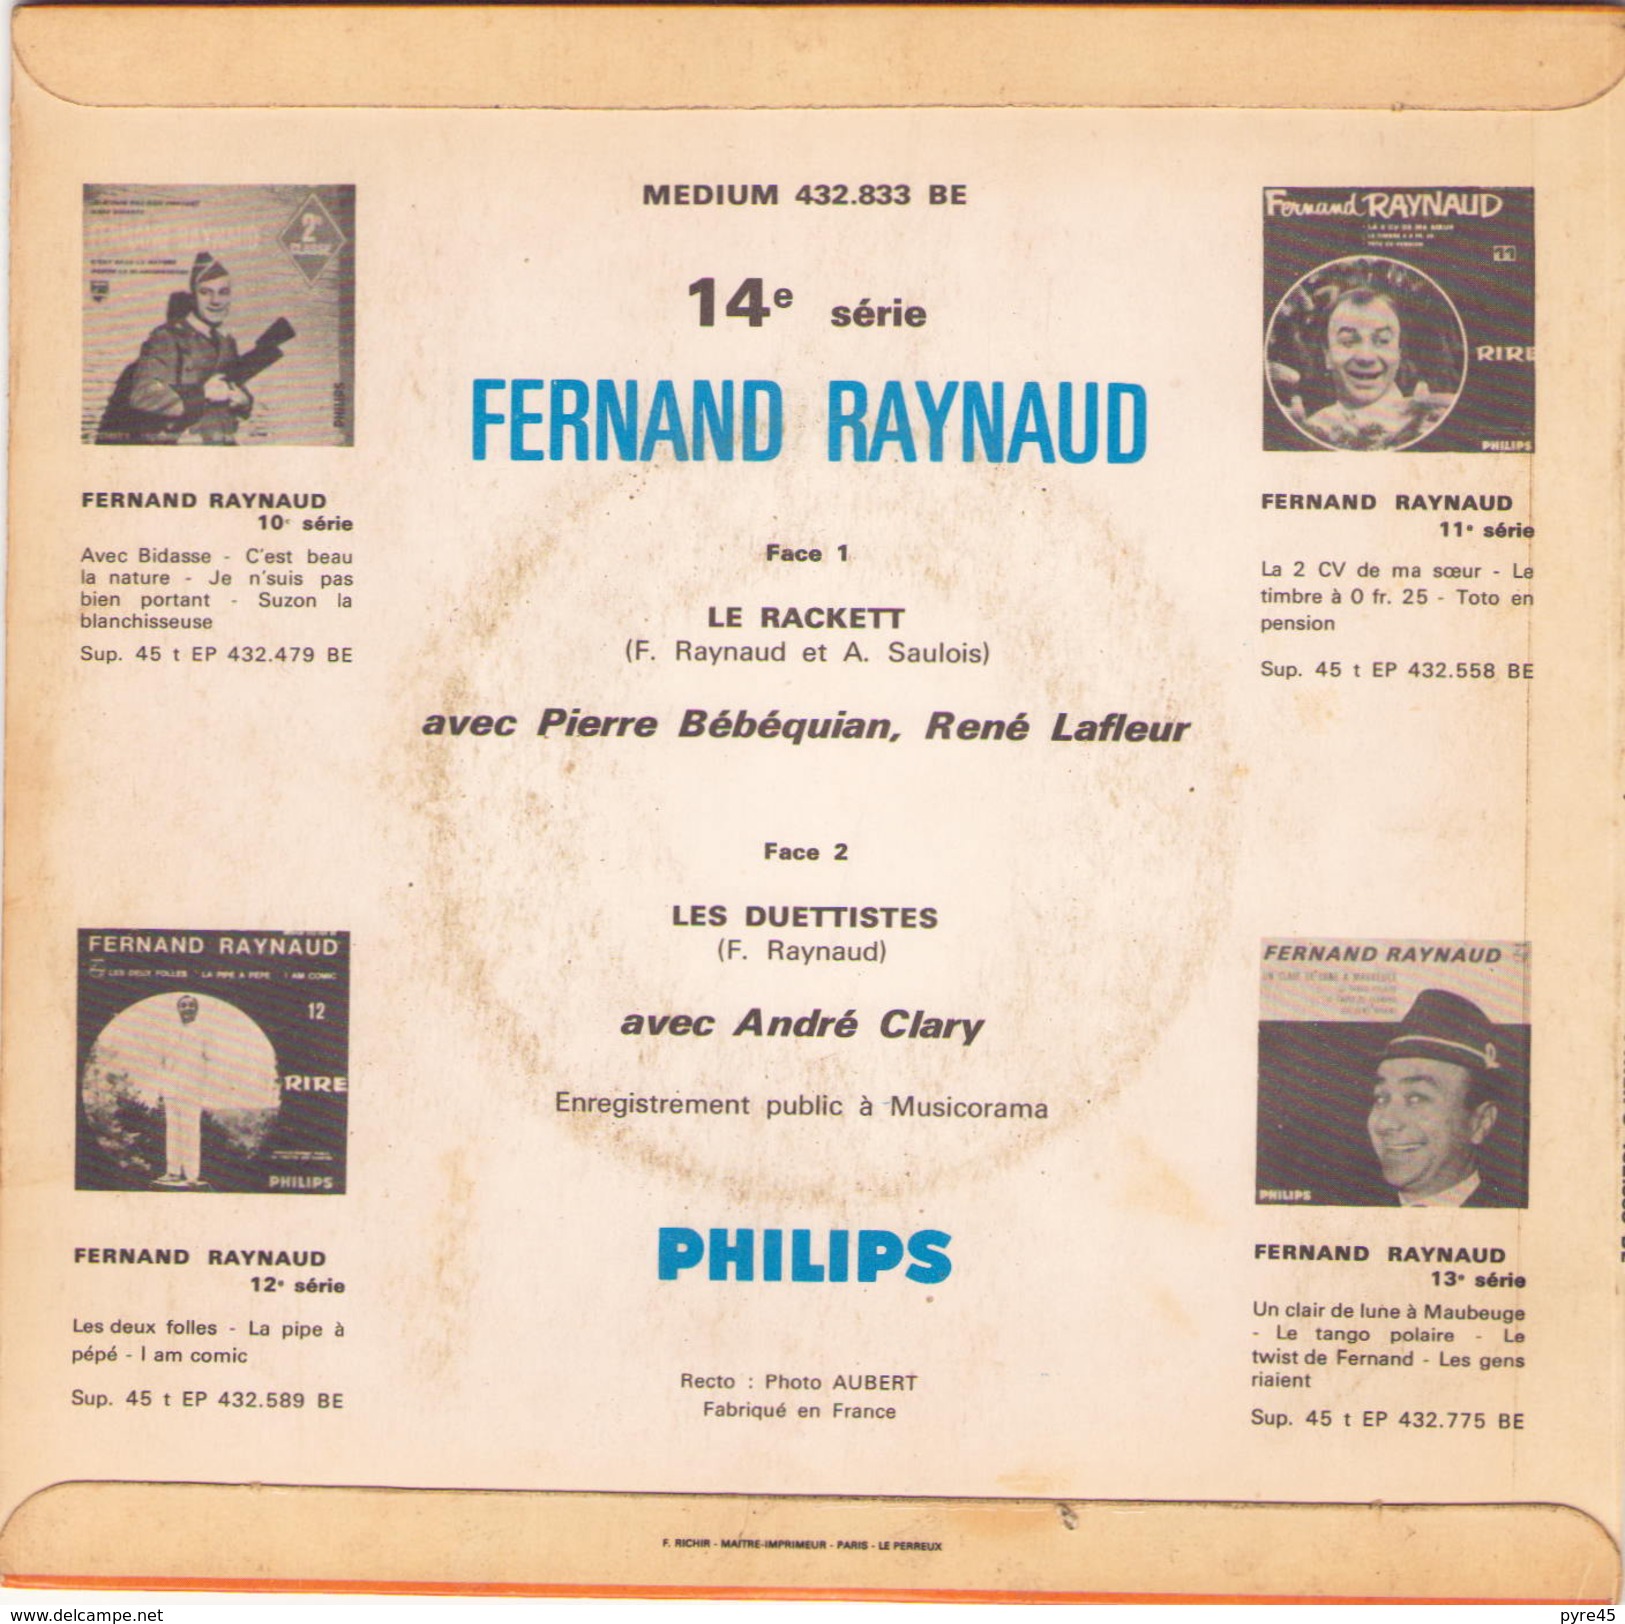 45 TOURS FERNAND RAYNAUD LE RACKETT / LES DUETTISTES PHILIPS 432833 - Comiques, Cabaret